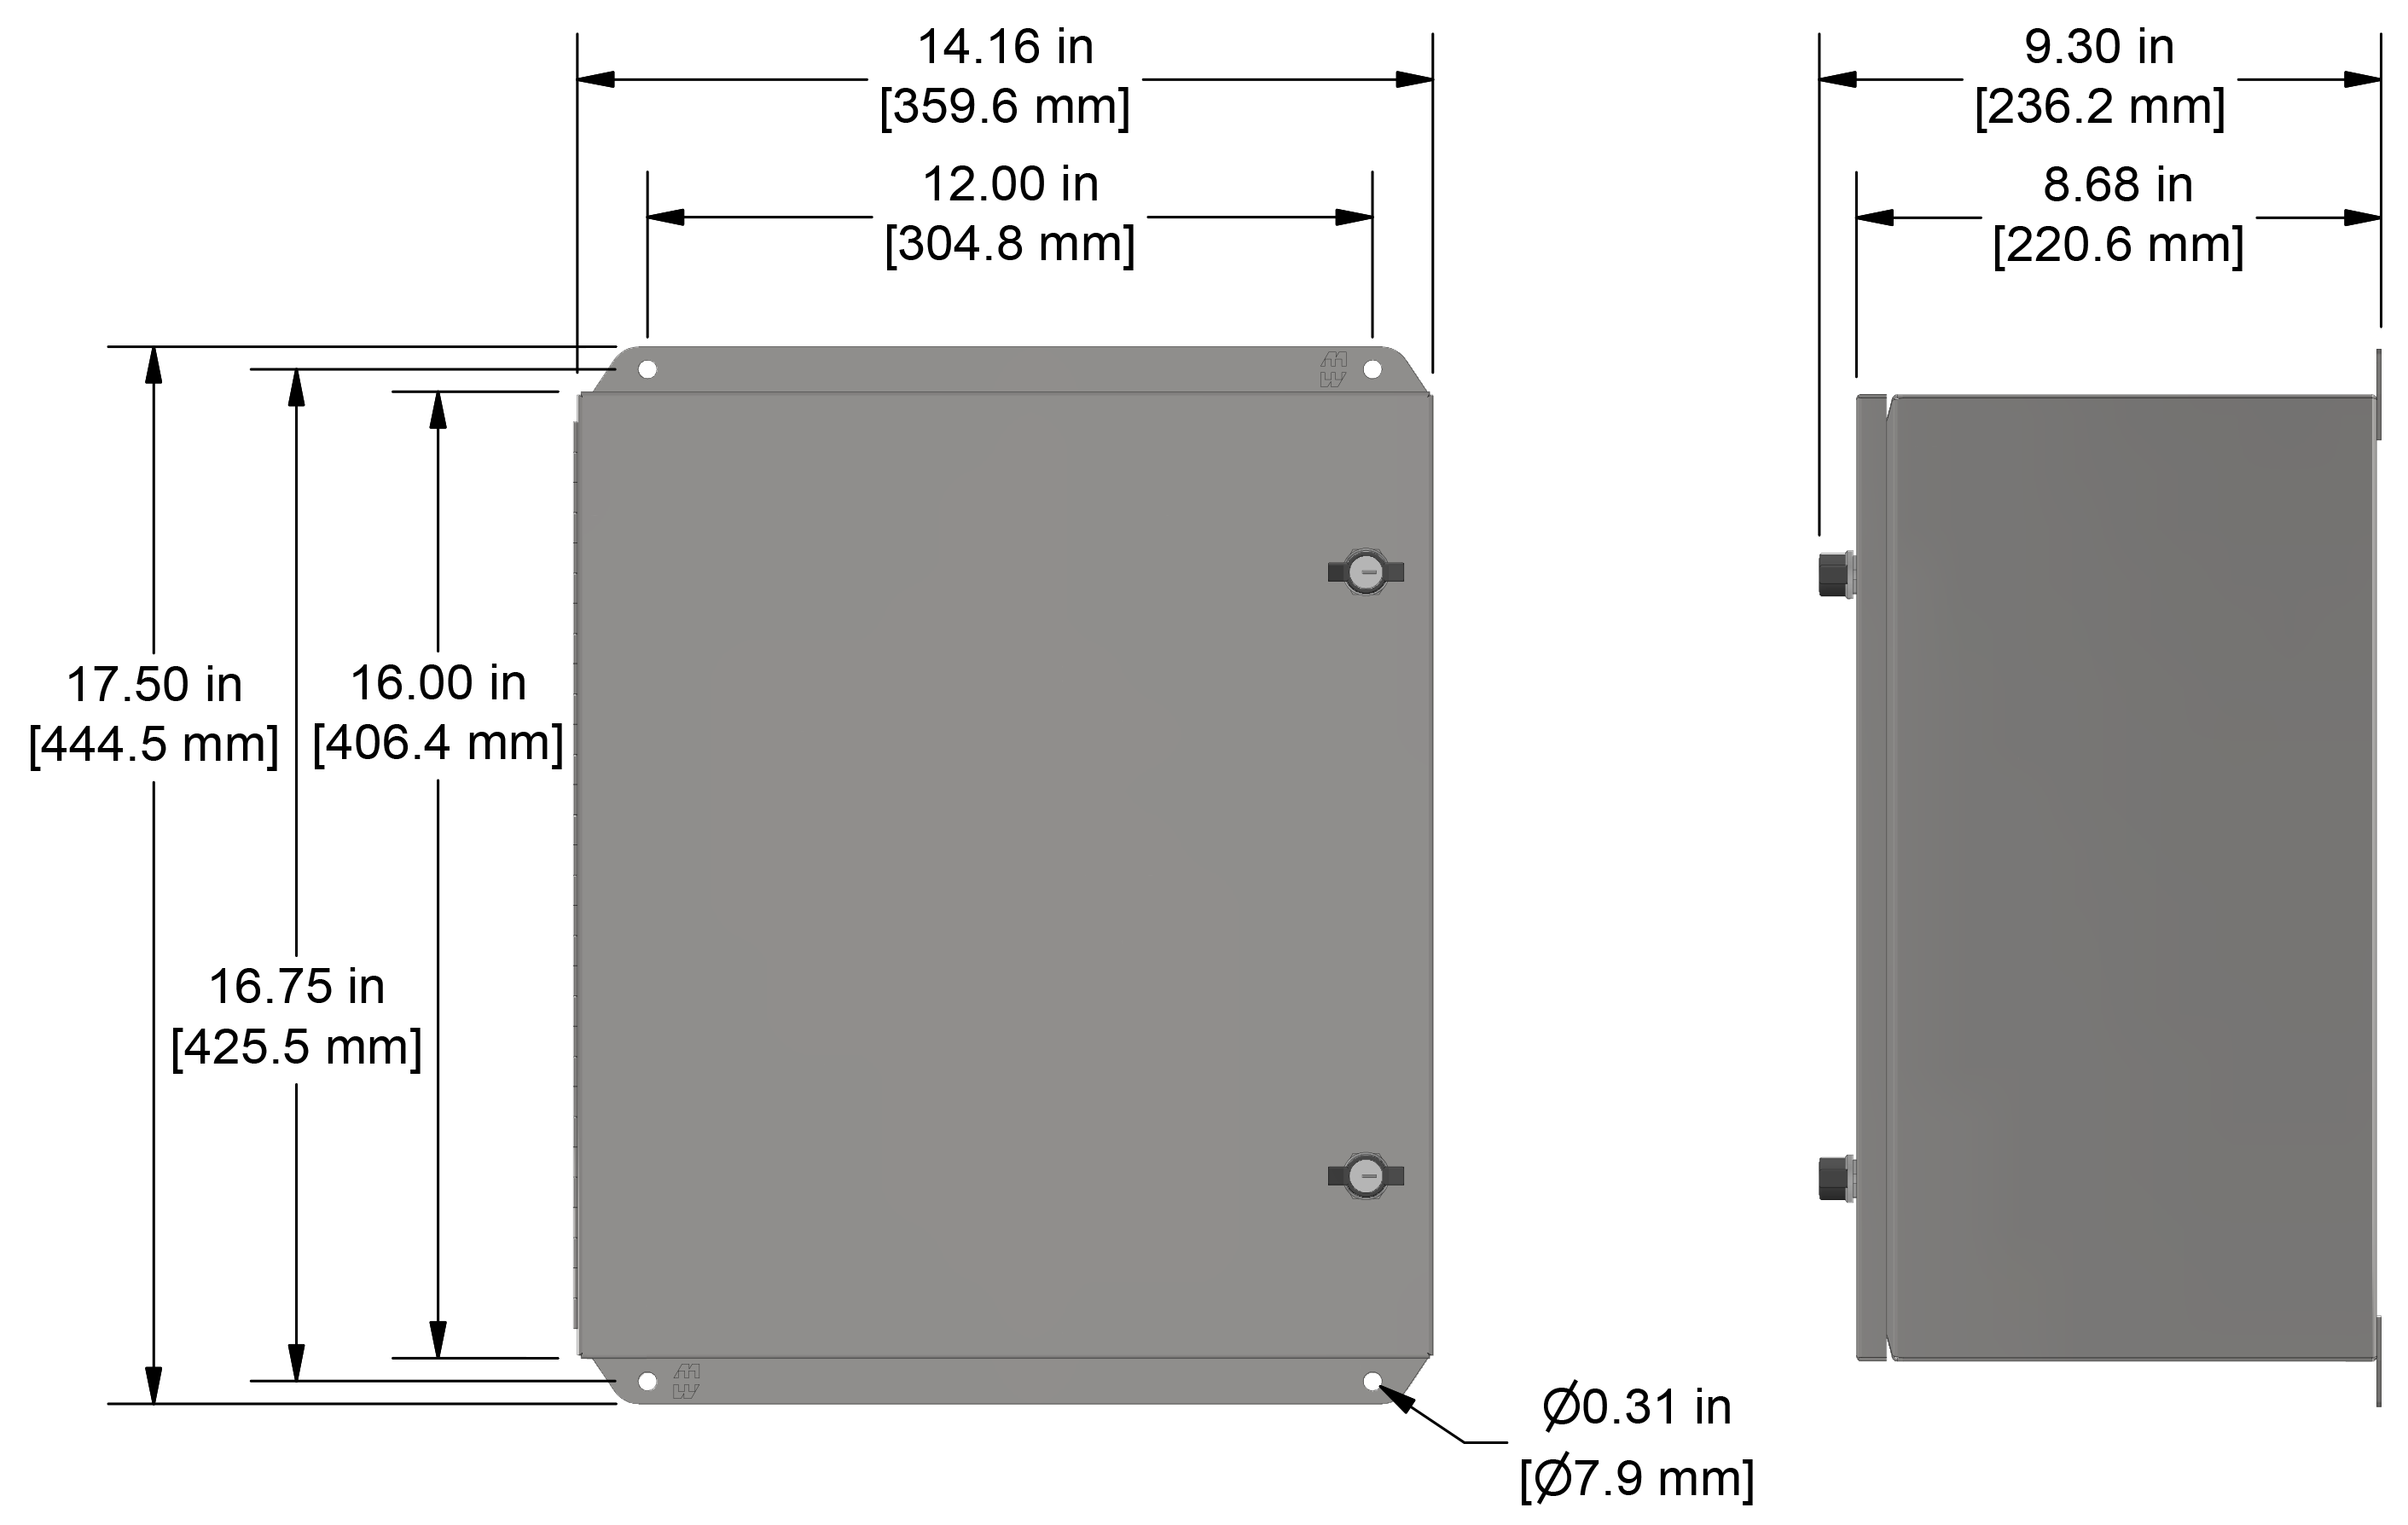 A drawing showing the dimensions of a CTC JB210 Extended Capacity industrial enclosure.